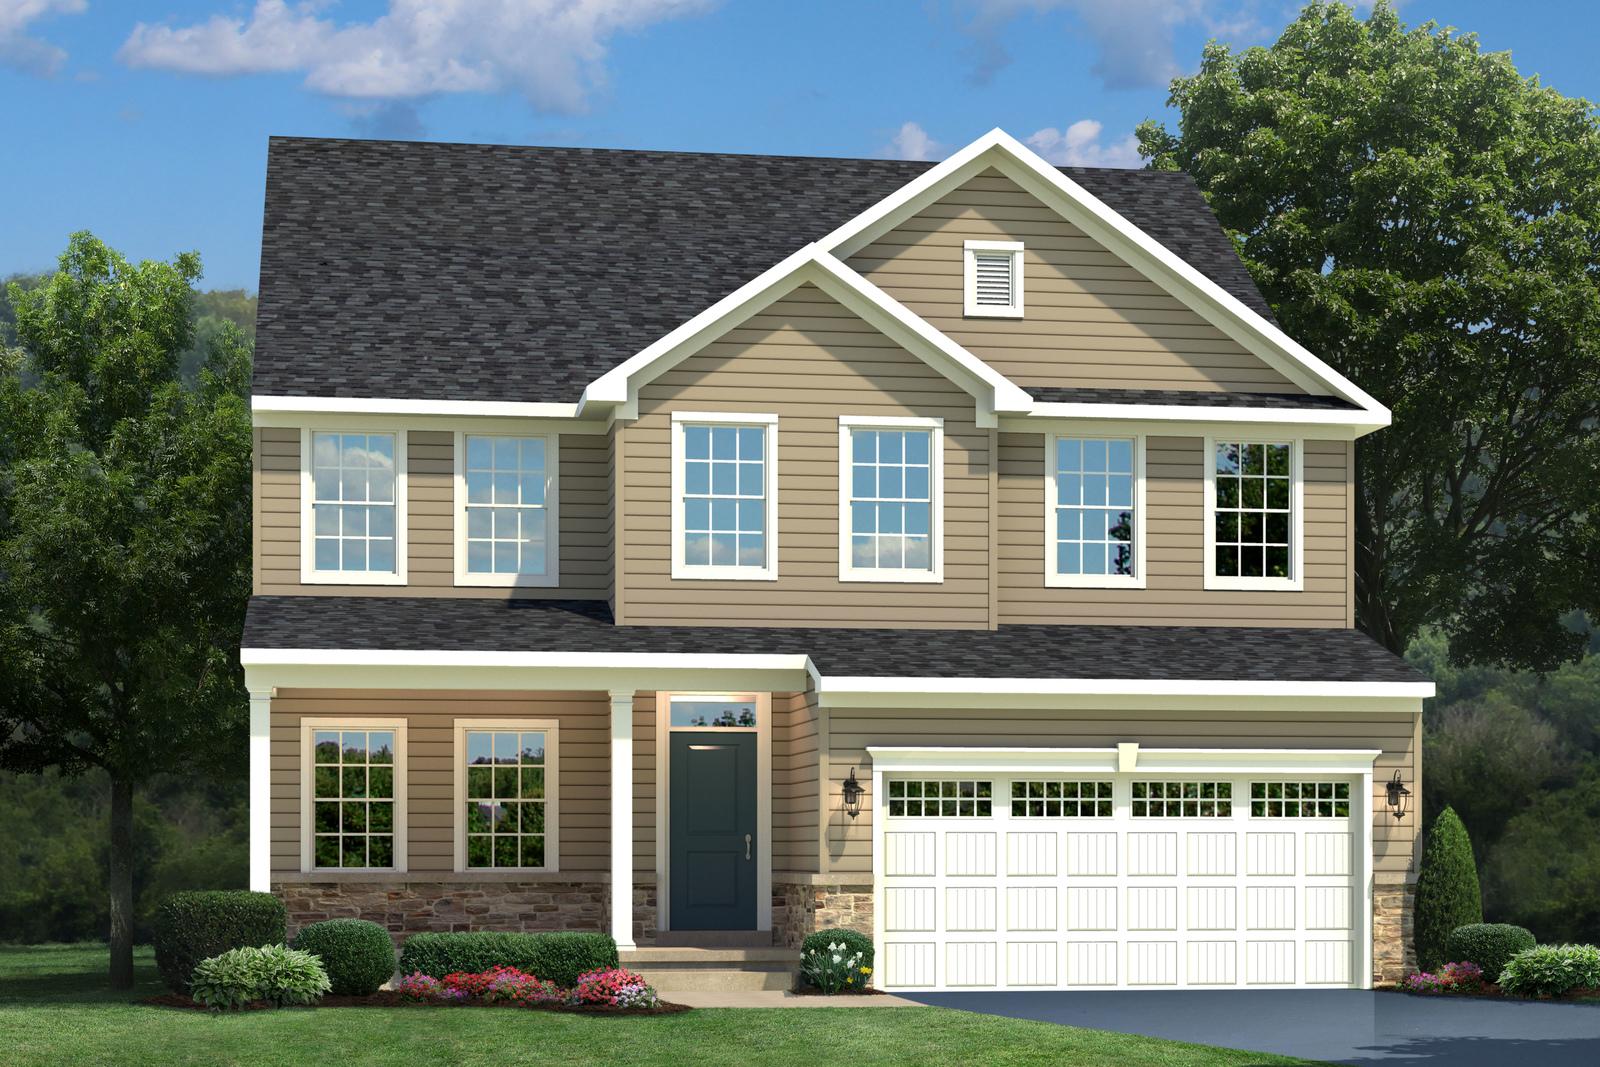 New Hudson Home Model for sale at Shipley Homestead in